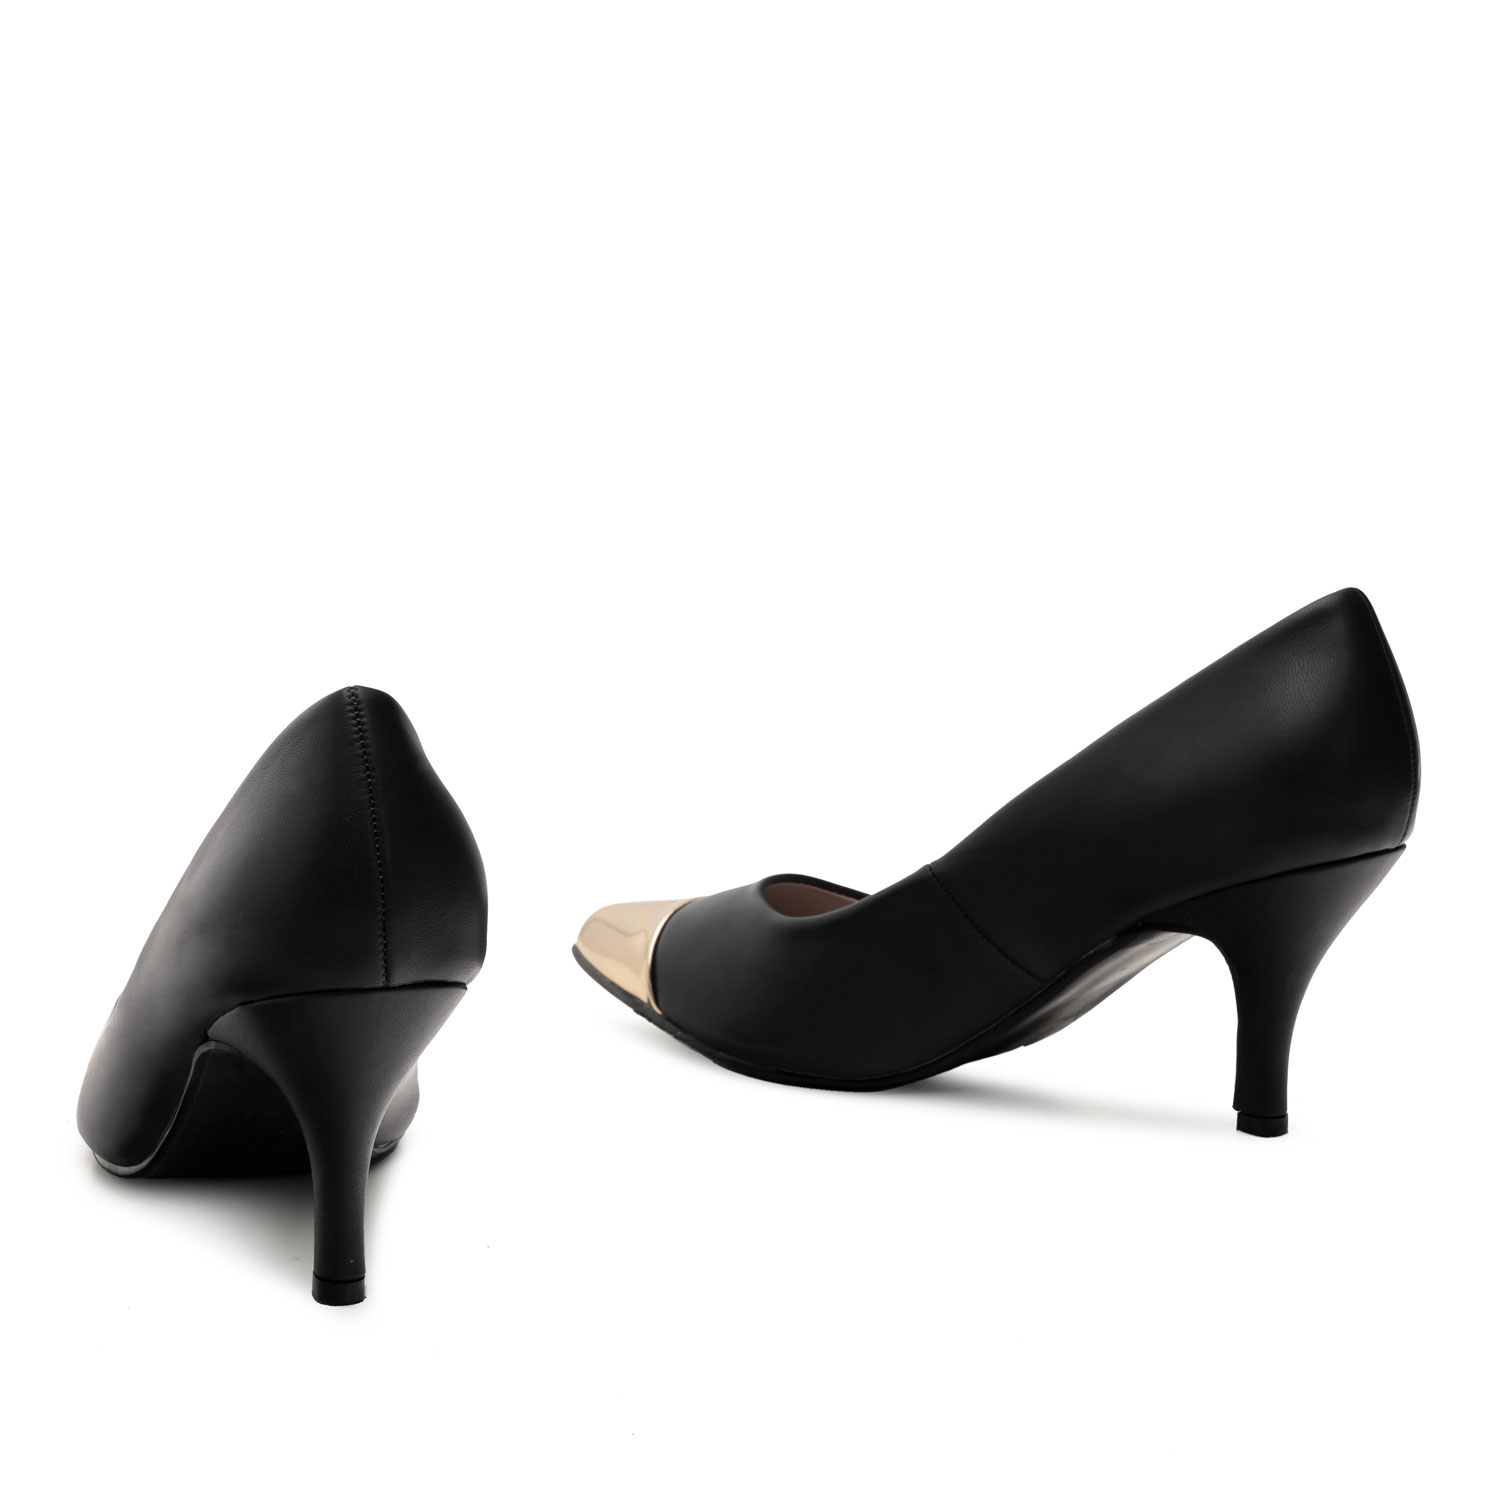 Stilettos in Black Soft leather with Golden Toe Cap 